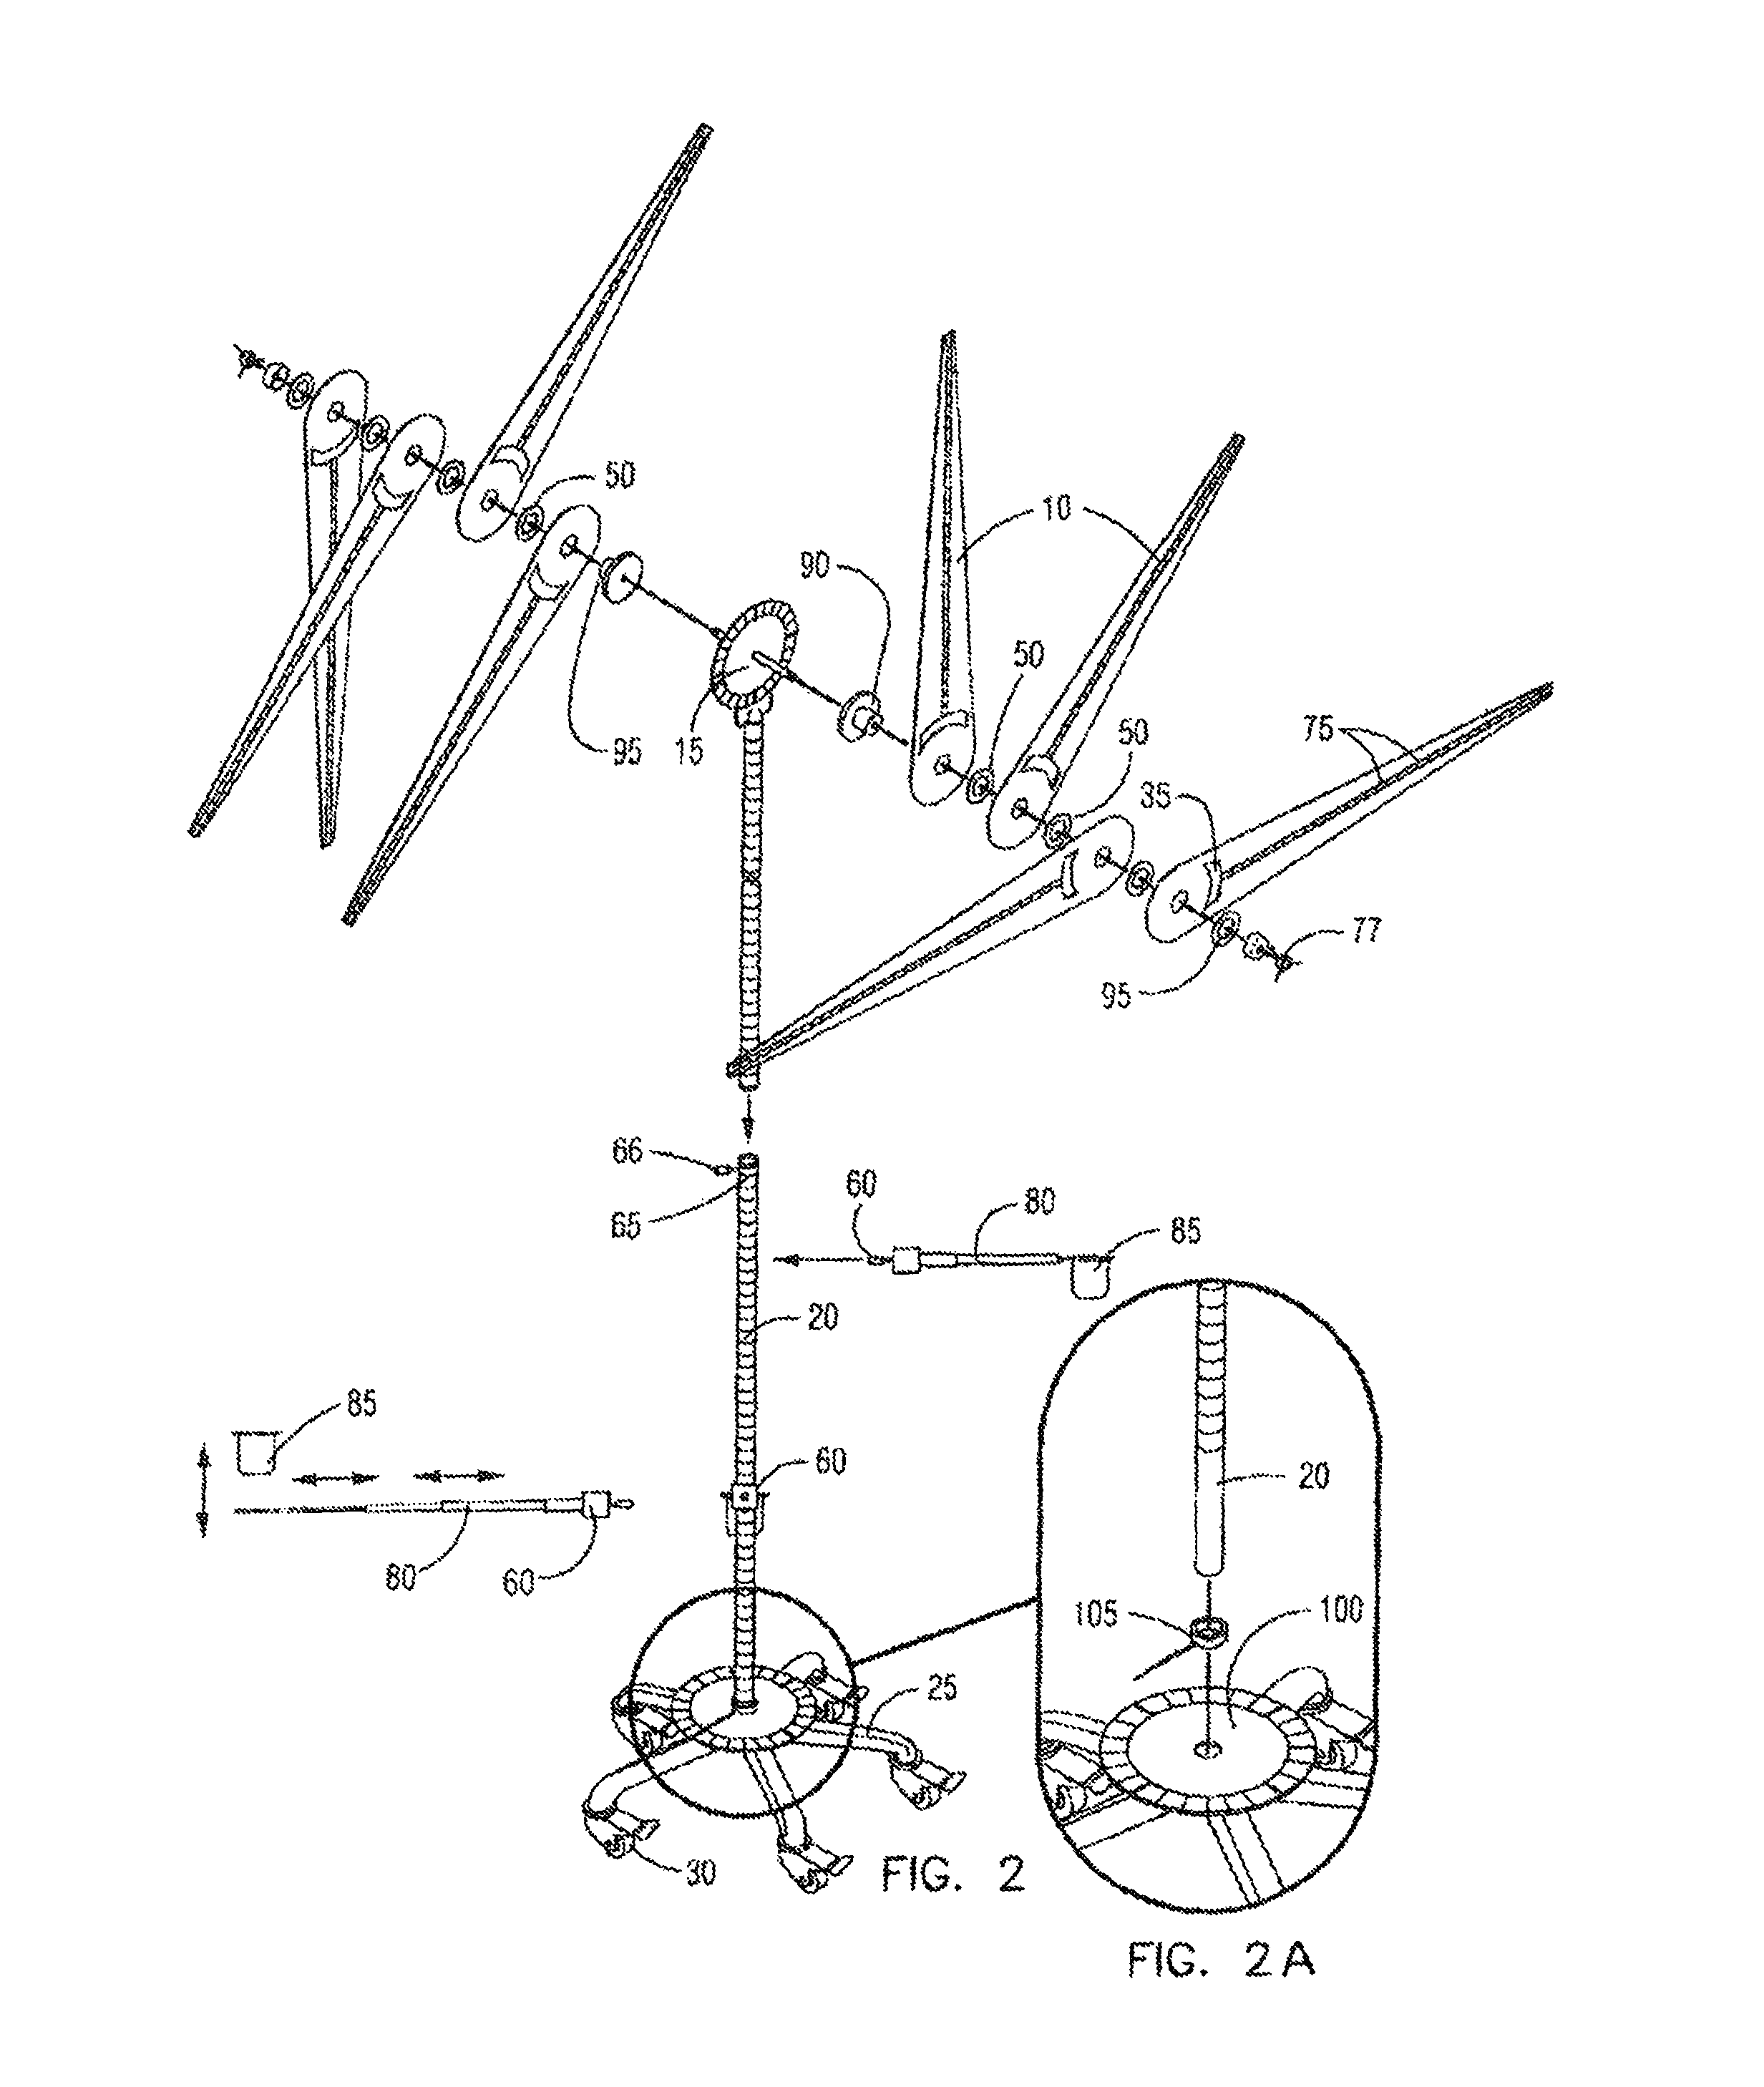 Neuromuscular testing device and method to use